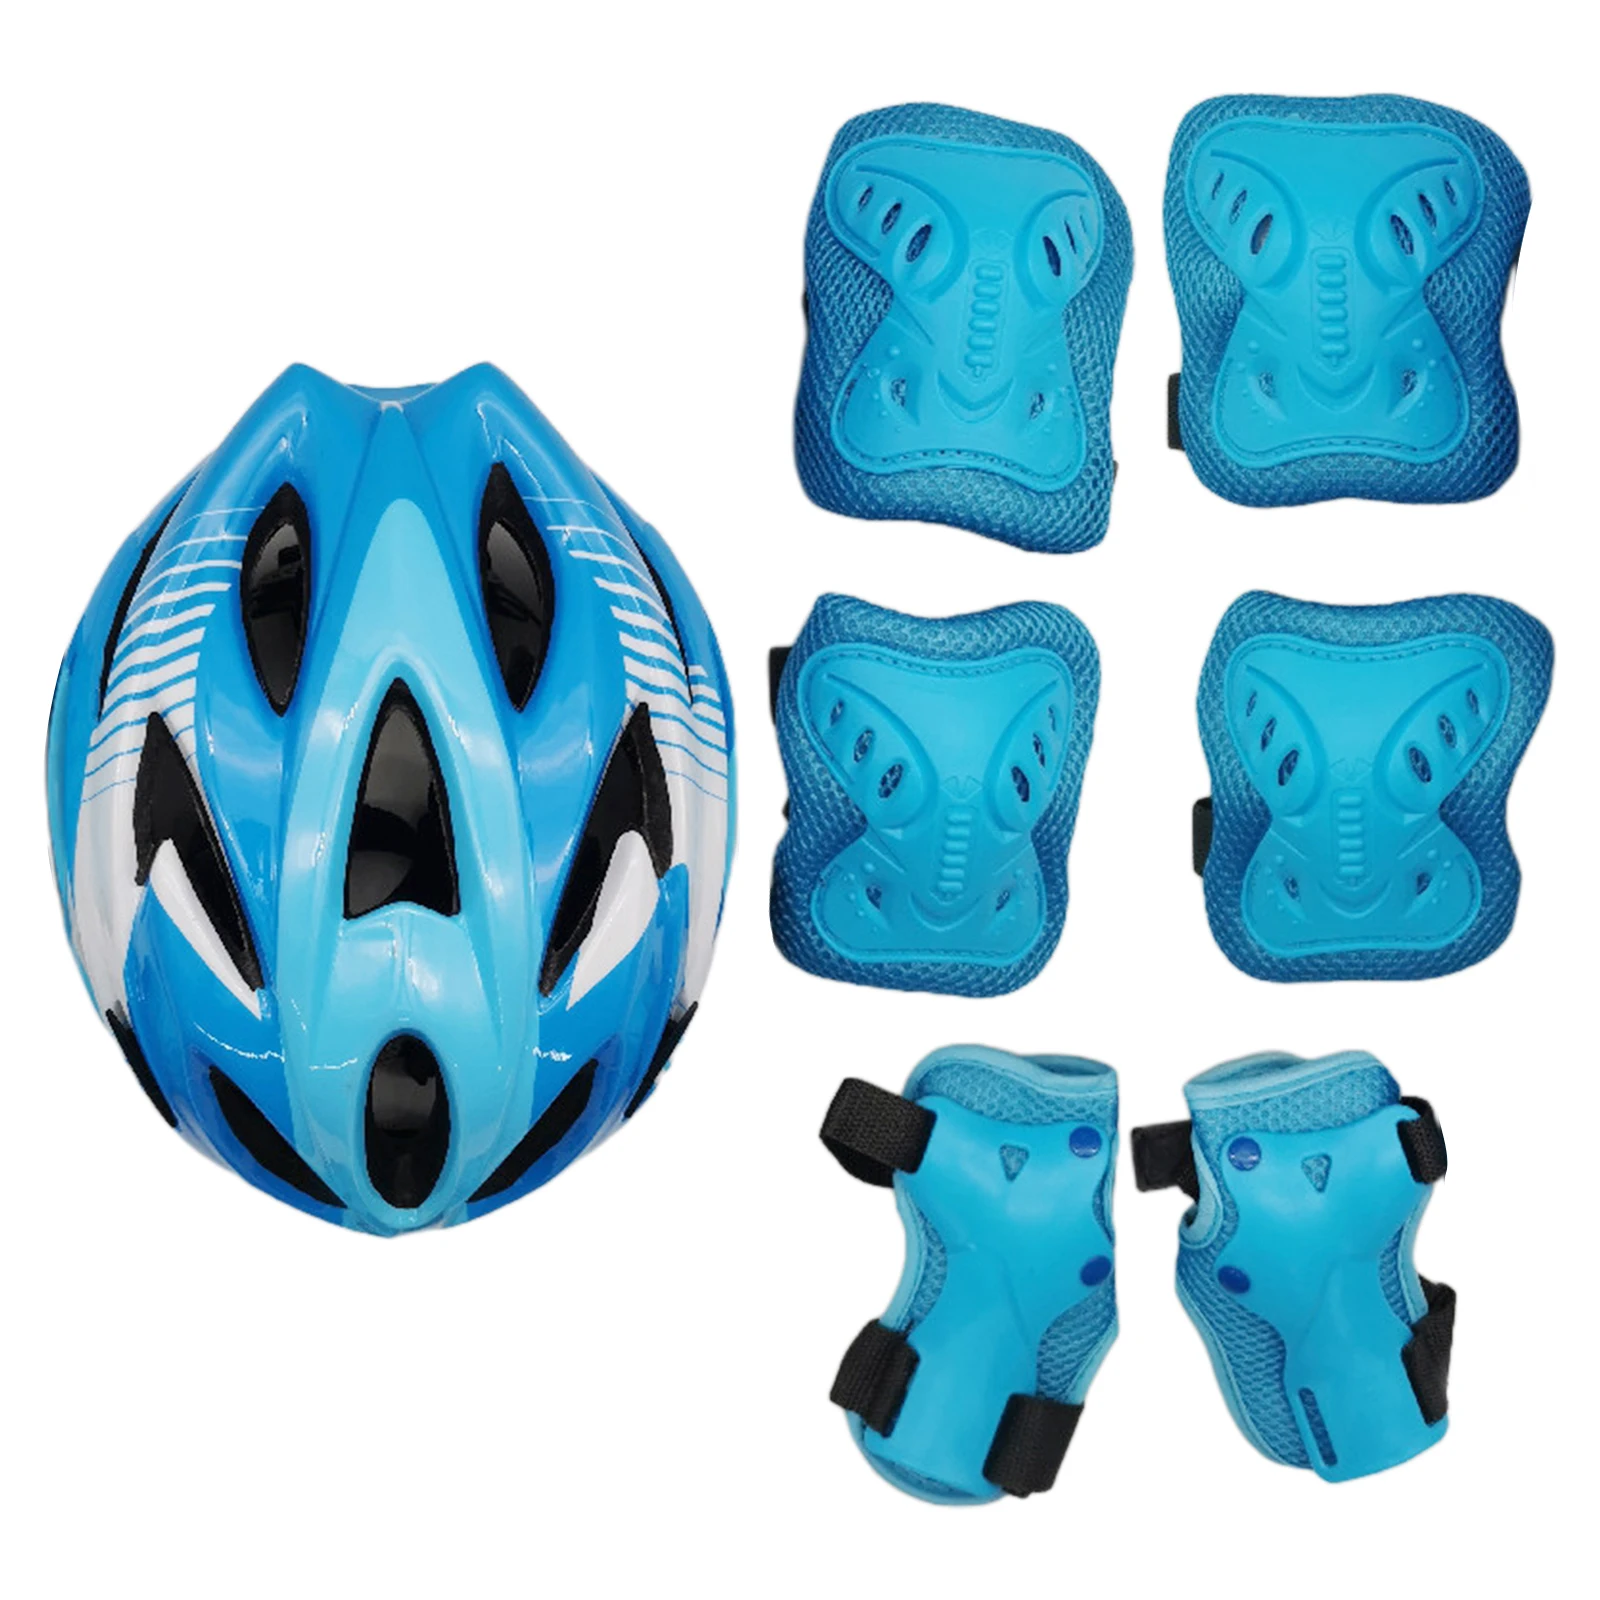 Complete 7pcs Roller Skating Protector Elbow Knee Pads Helmet Kids Riding Skateboard Ice Sports Wrist Guard Protective Gear Set